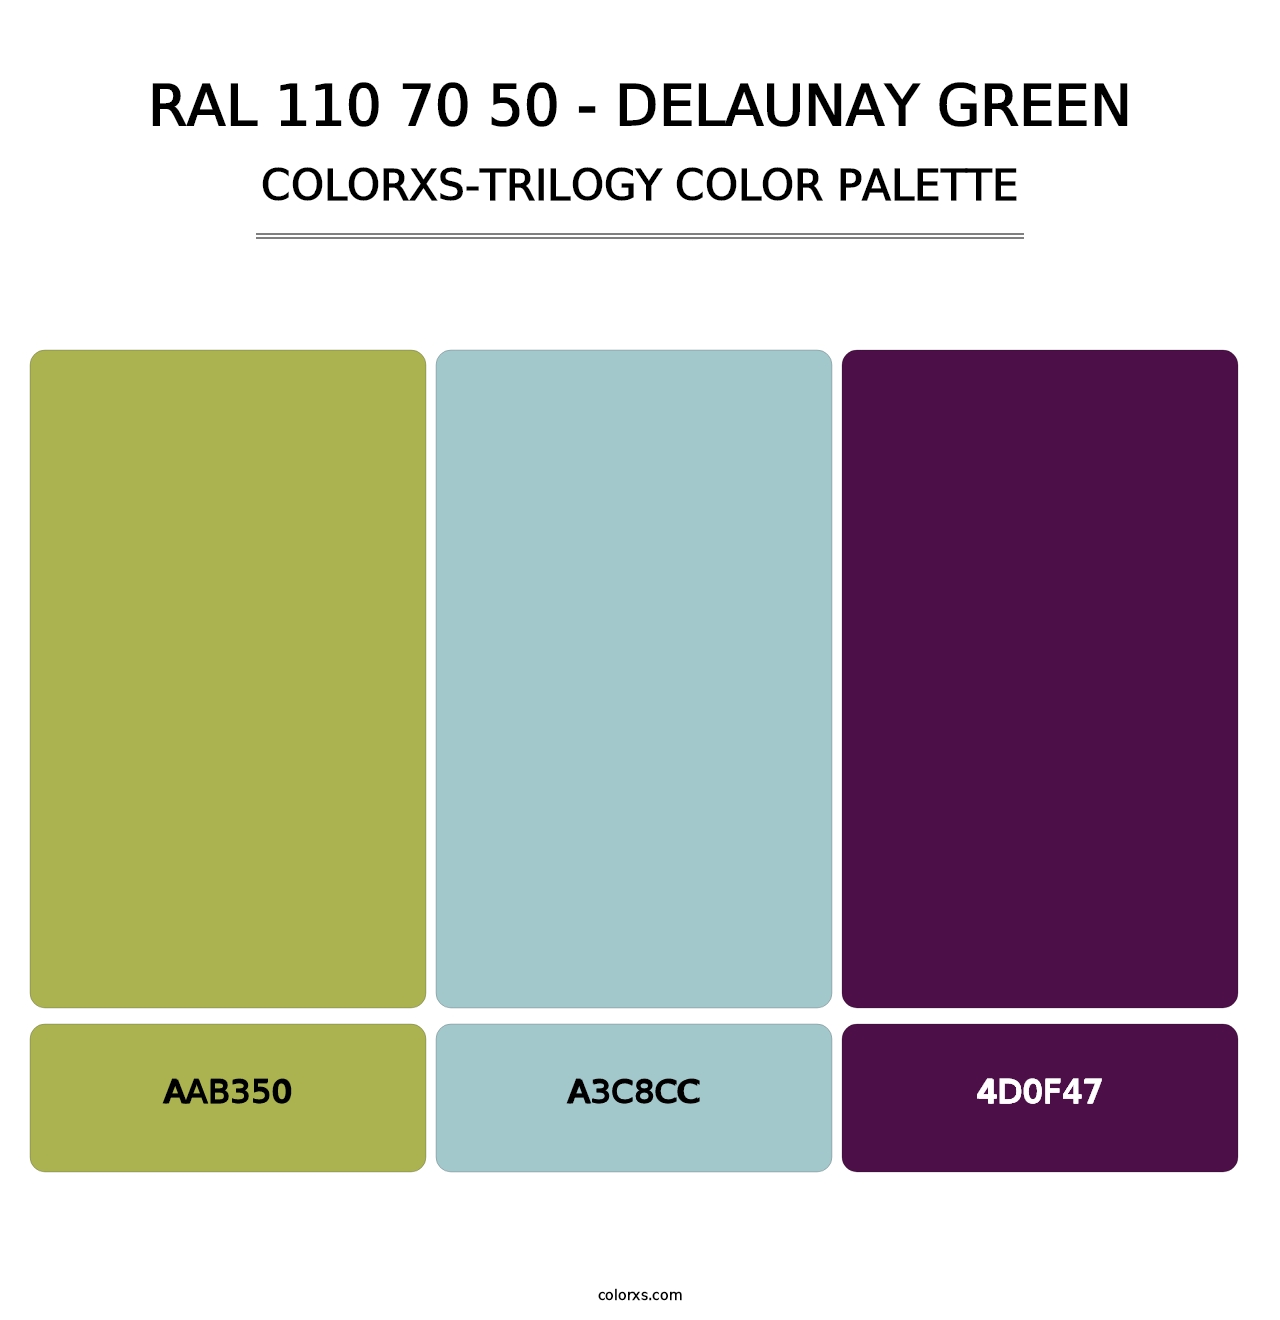 RAL 110 70 50 - Delaunay Green - Colorxs Trilogy Palette